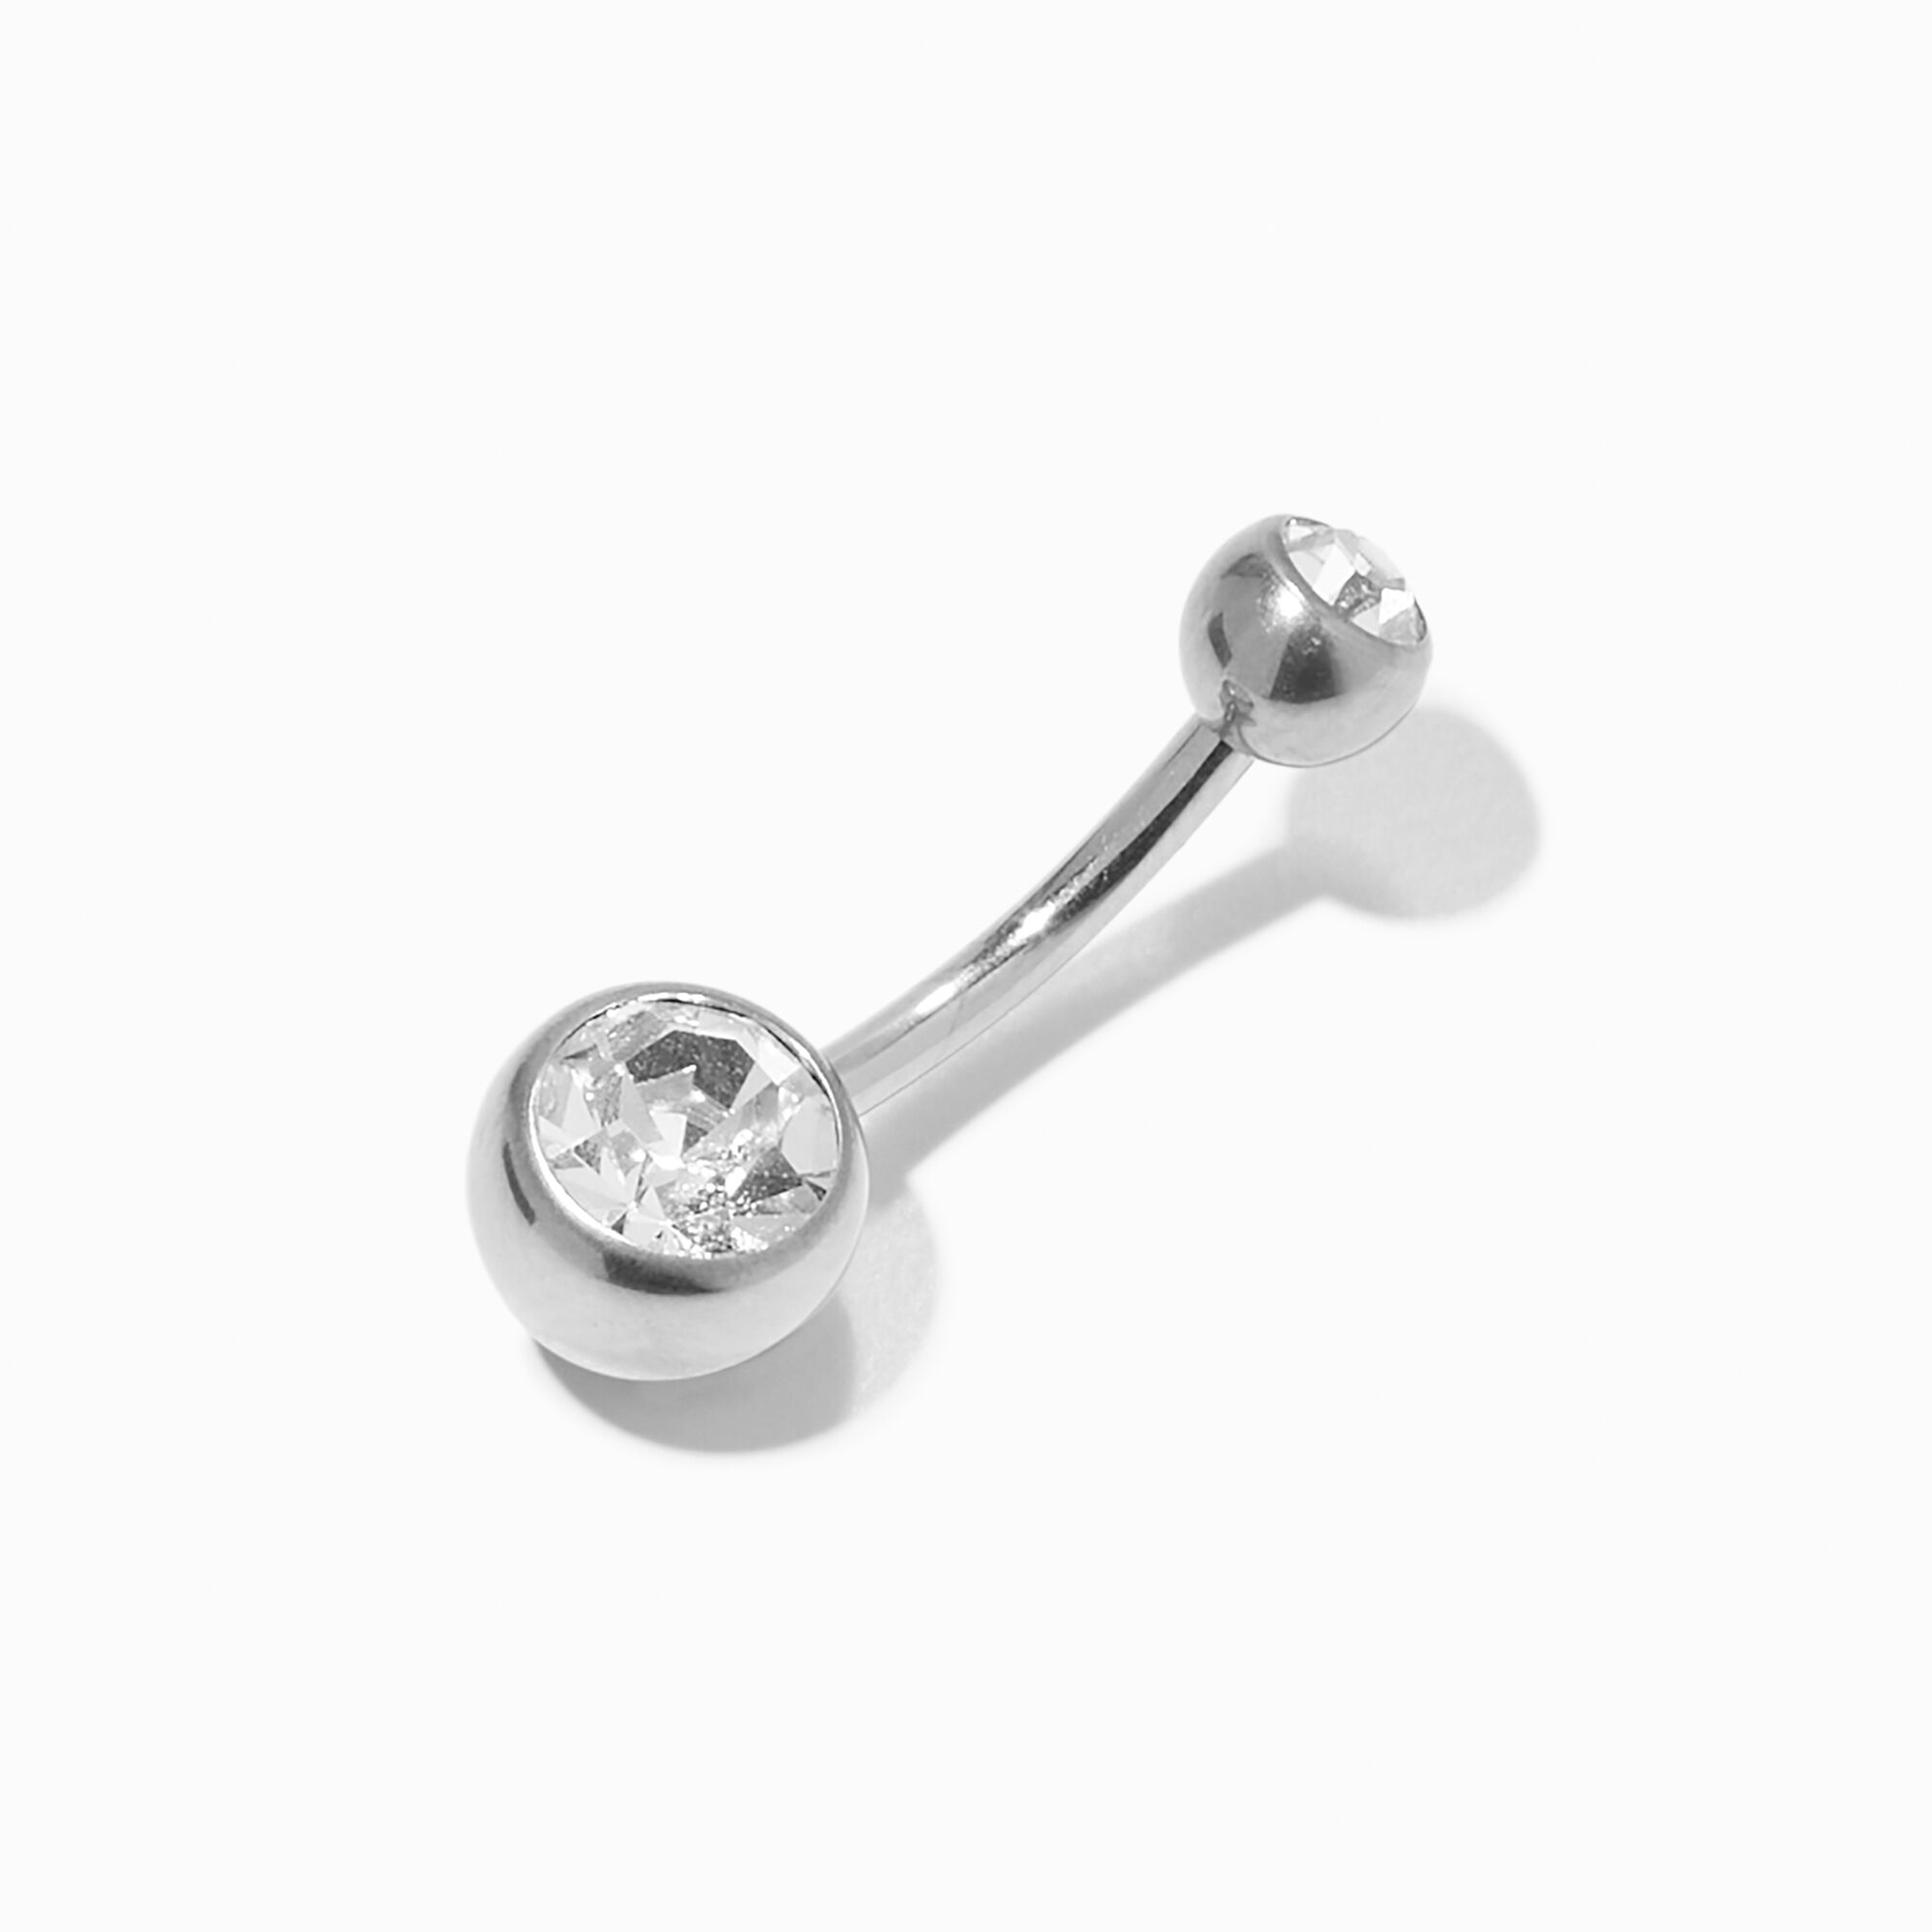 GadgetsDen Solid Titanium Belly Button Rings Piercing, Implant Grade  Titanium Navel Rings Stainless Steel Beaded Charm Price in India - Buy  GadgetsDen Solid Titanium Belly Button Rings Piercing, Implant Grade  Titanium Navel